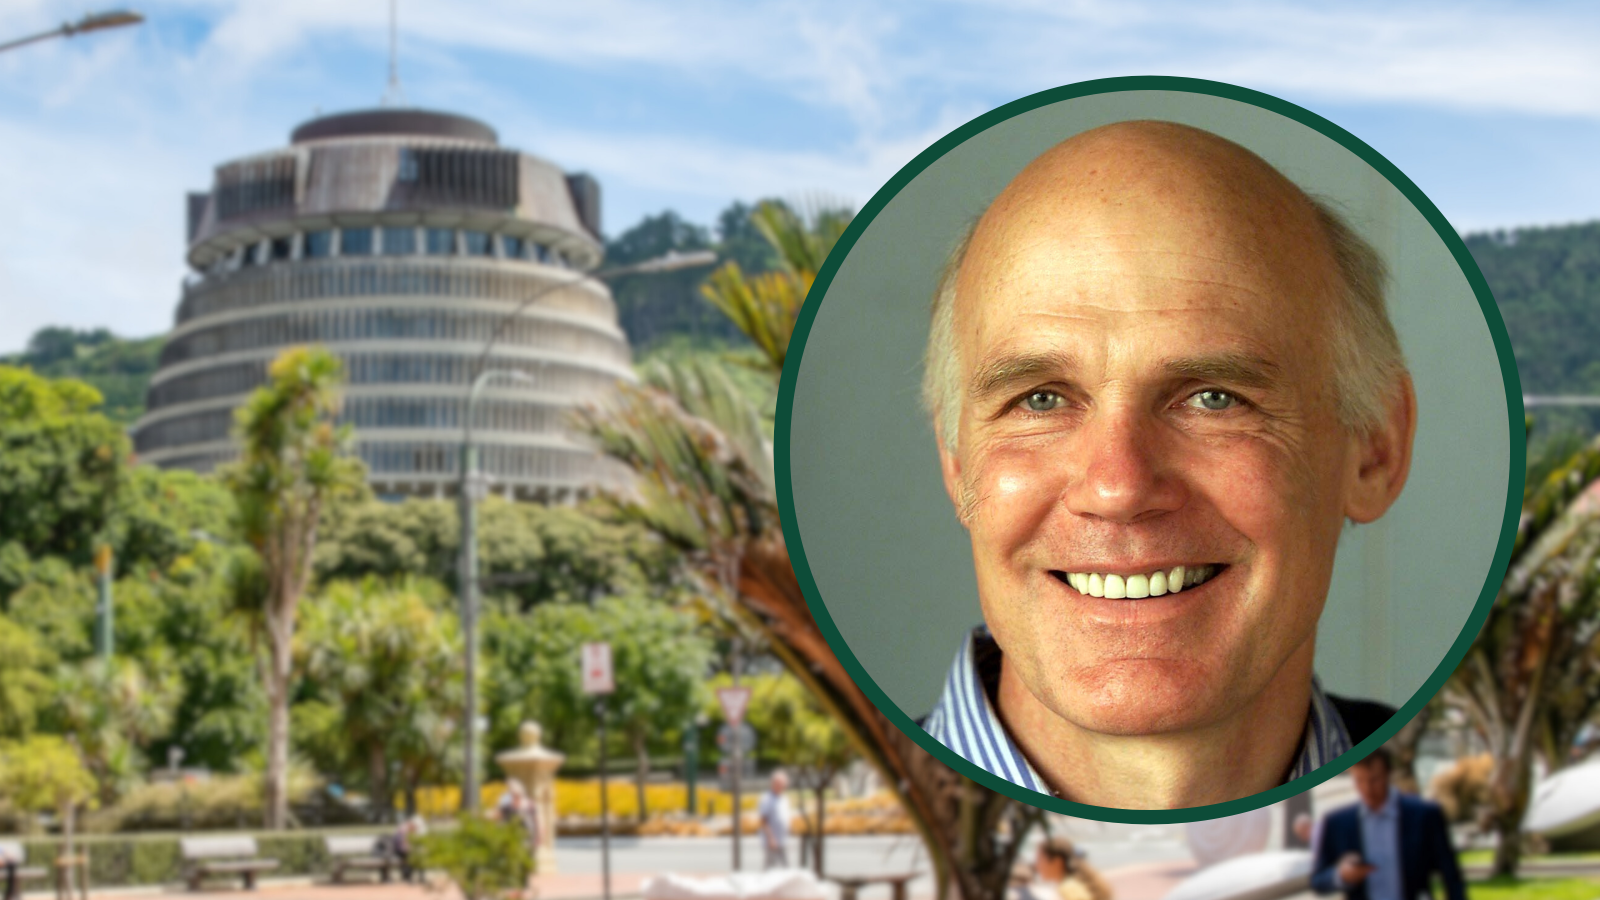 A photo of a smiling man is superimposed in front of the Wellington Beehive.